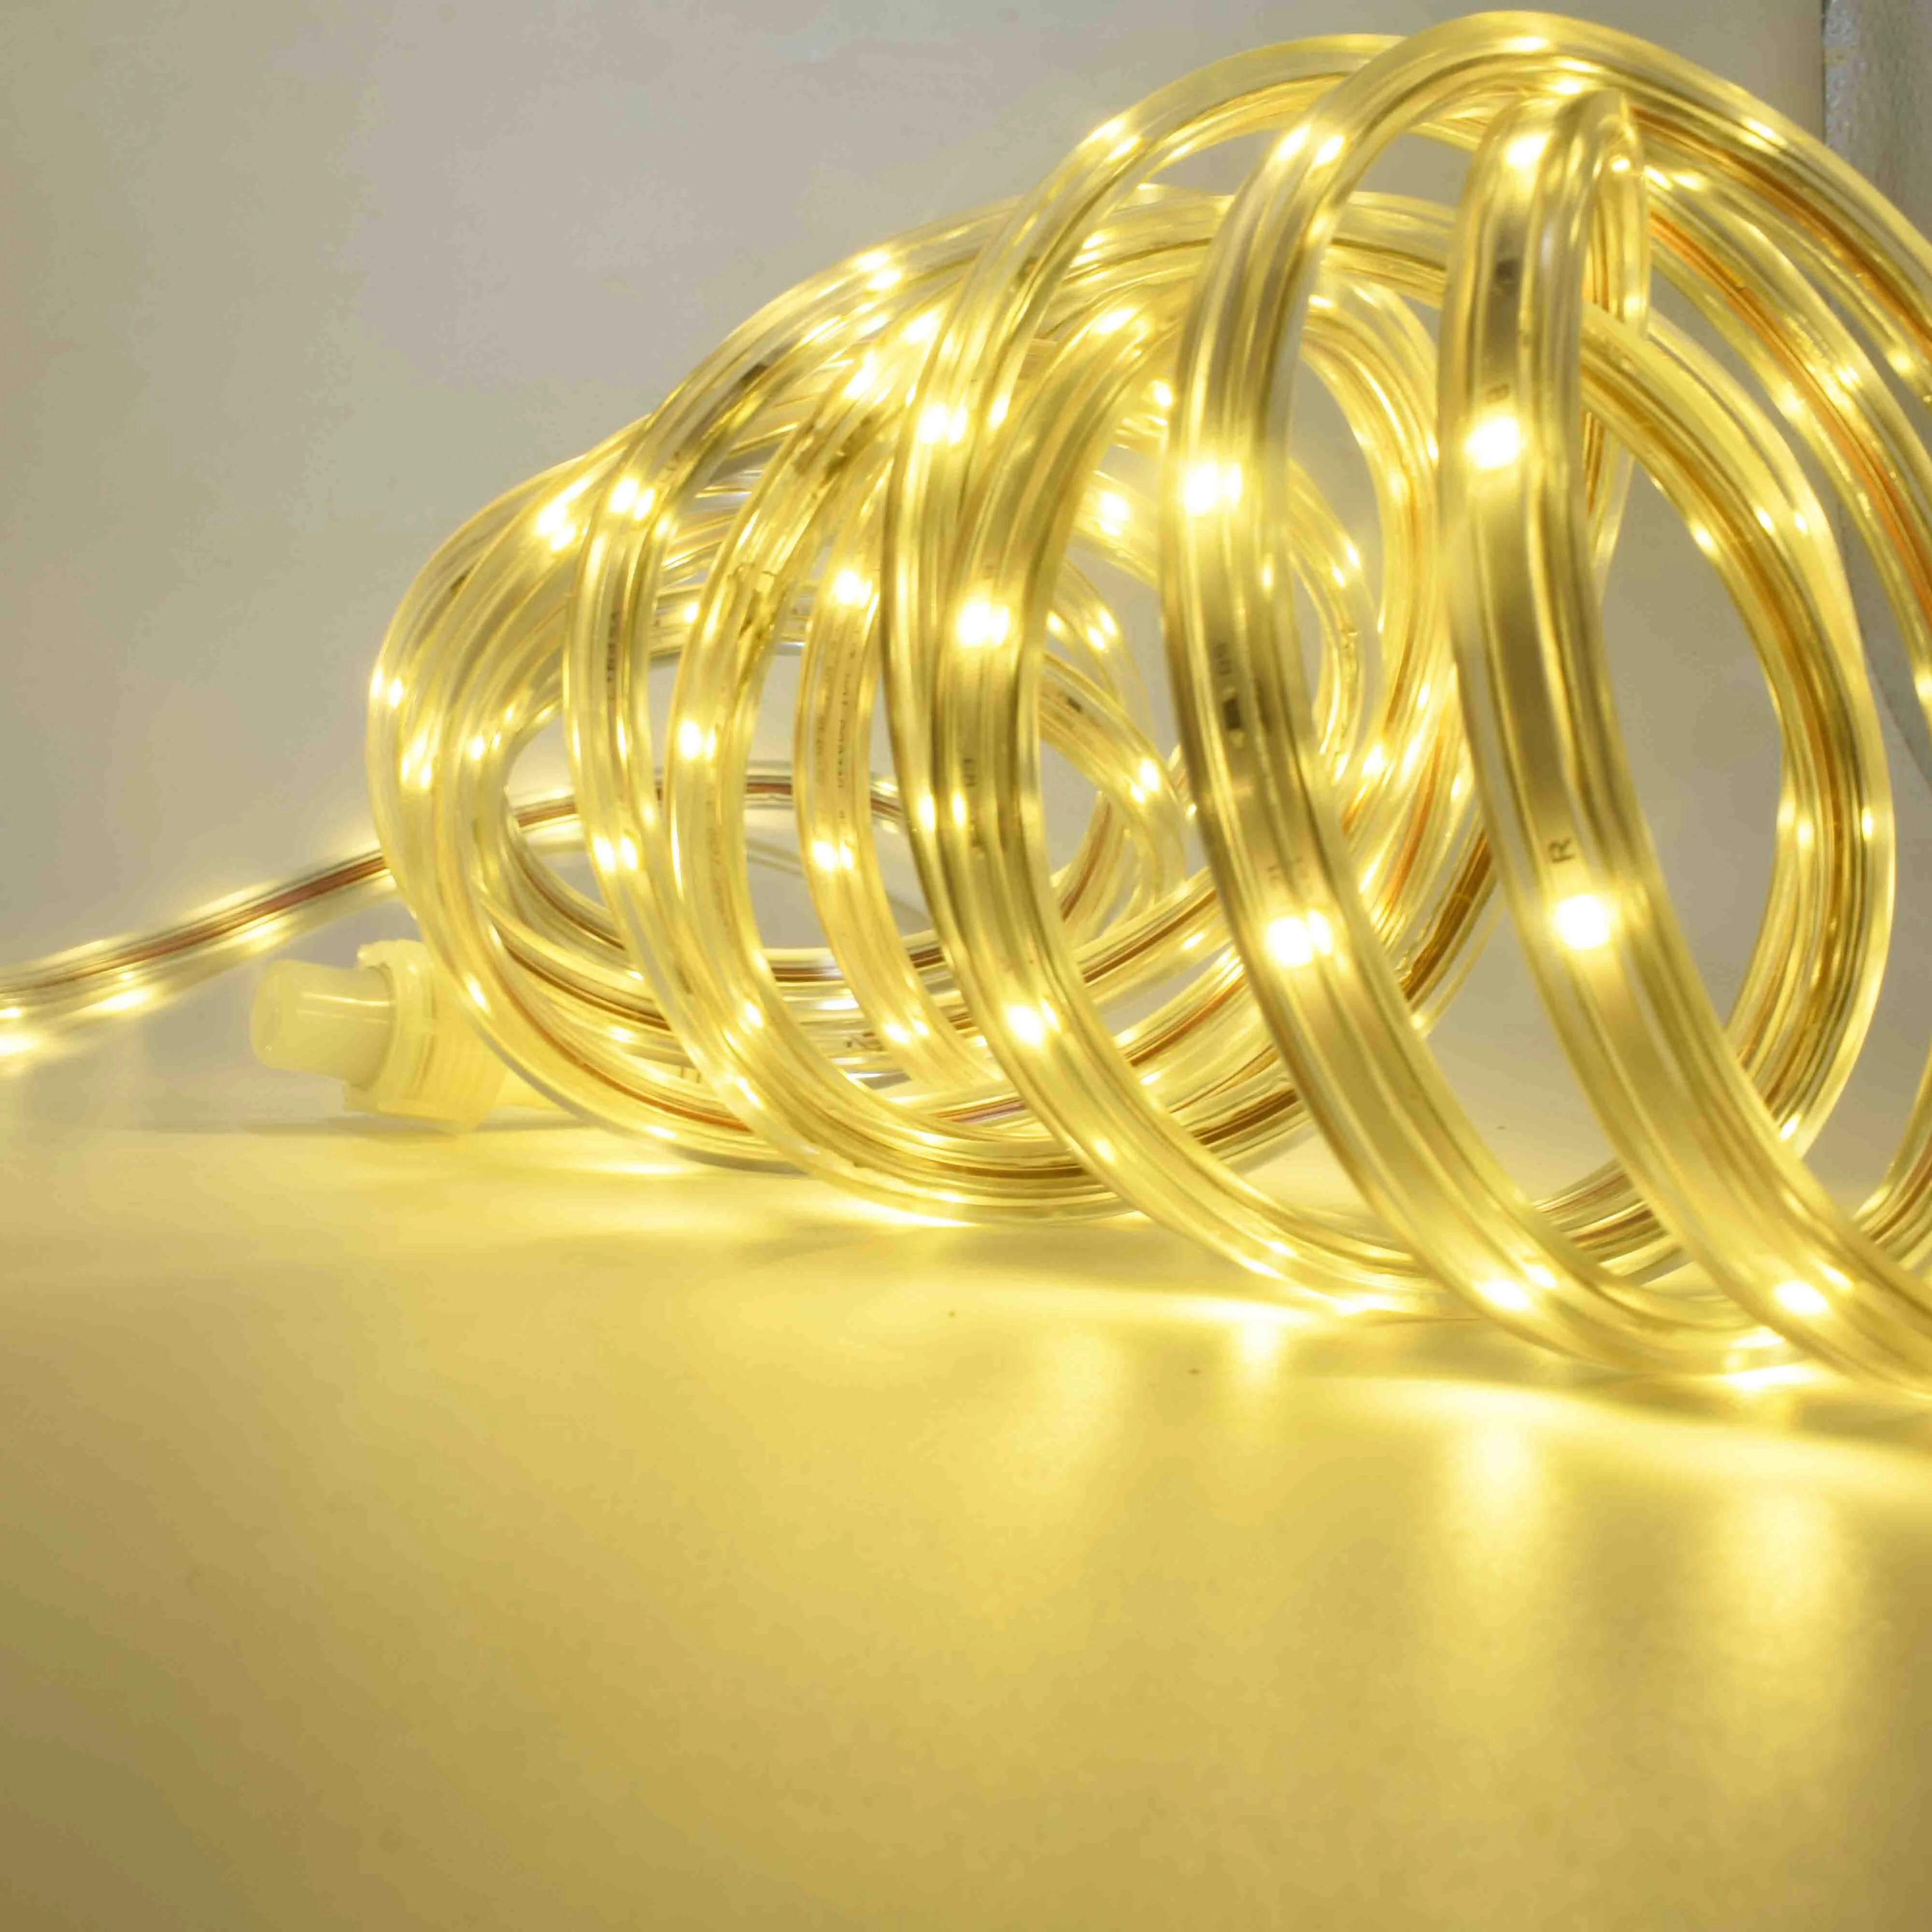 4.5m 15ft 135 LEDs tape light rope light for Christmas decoration holiday decor Commercial use Project indoor outdoor